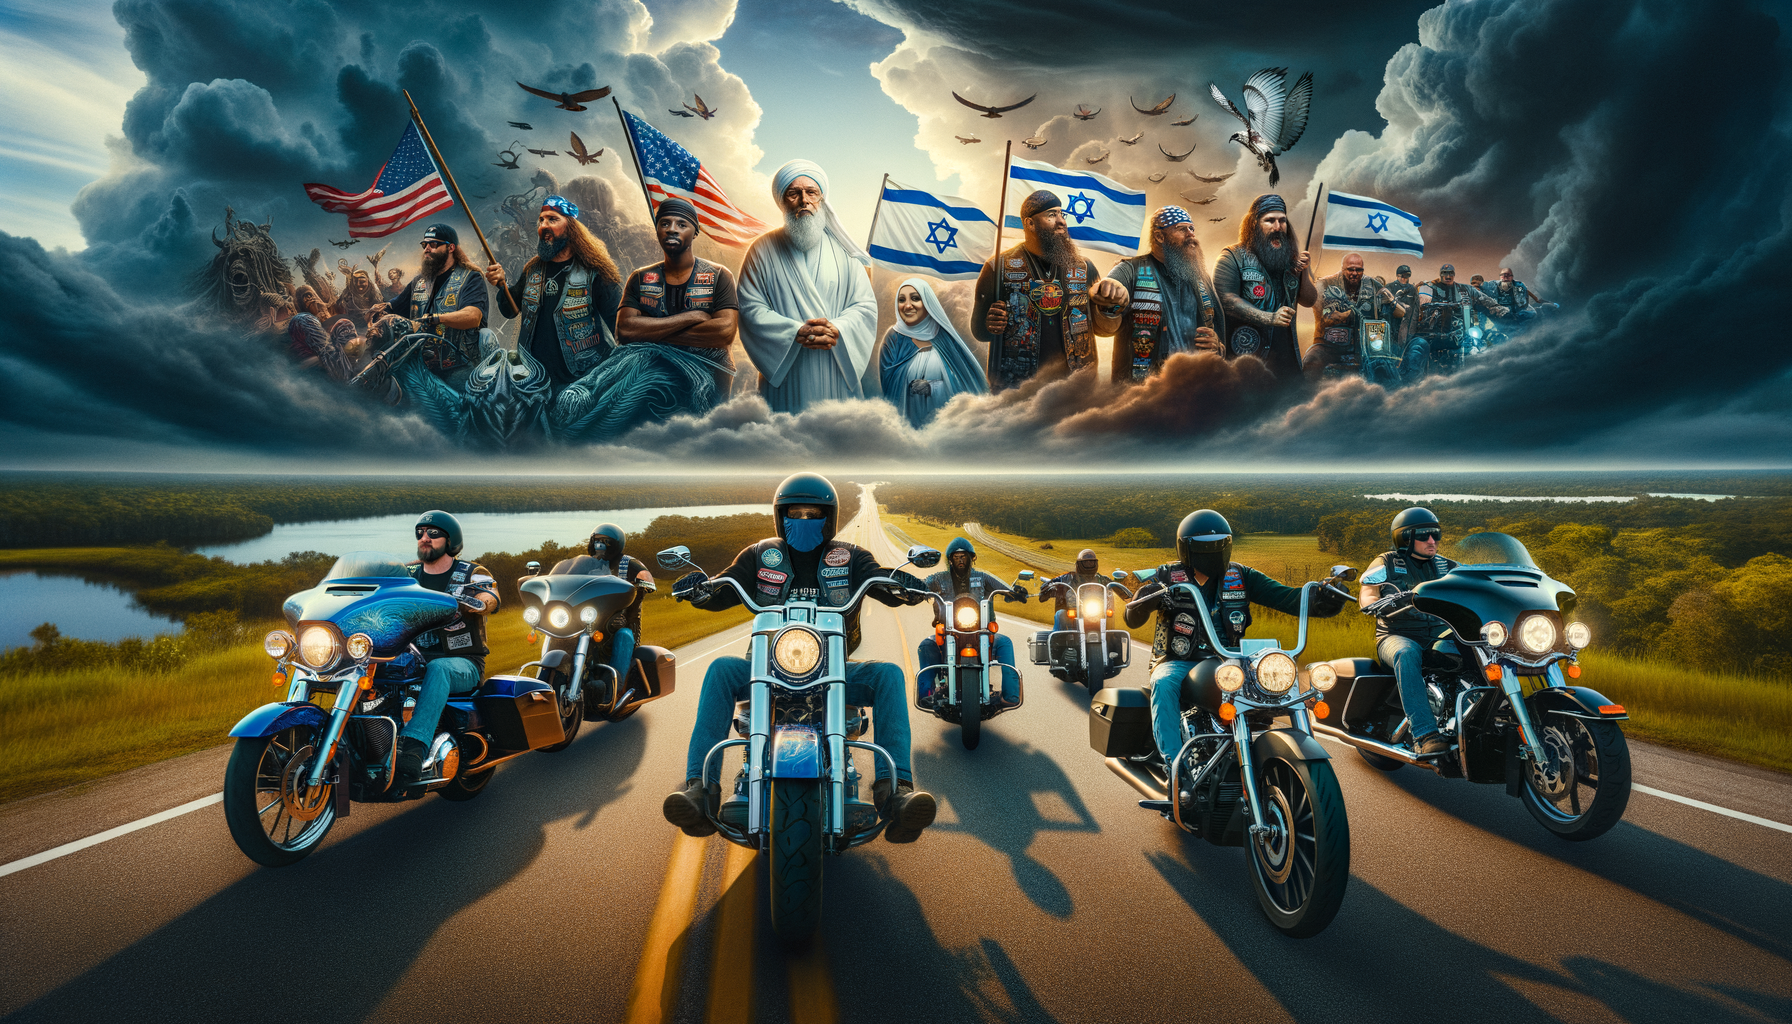 rolling thunder motorcycle club of south florida joins the ride for israel in orlando, usa. be part of the excitement as we ride for a cause and support israel. join us for an unforgettable journey through the heart of the usa!